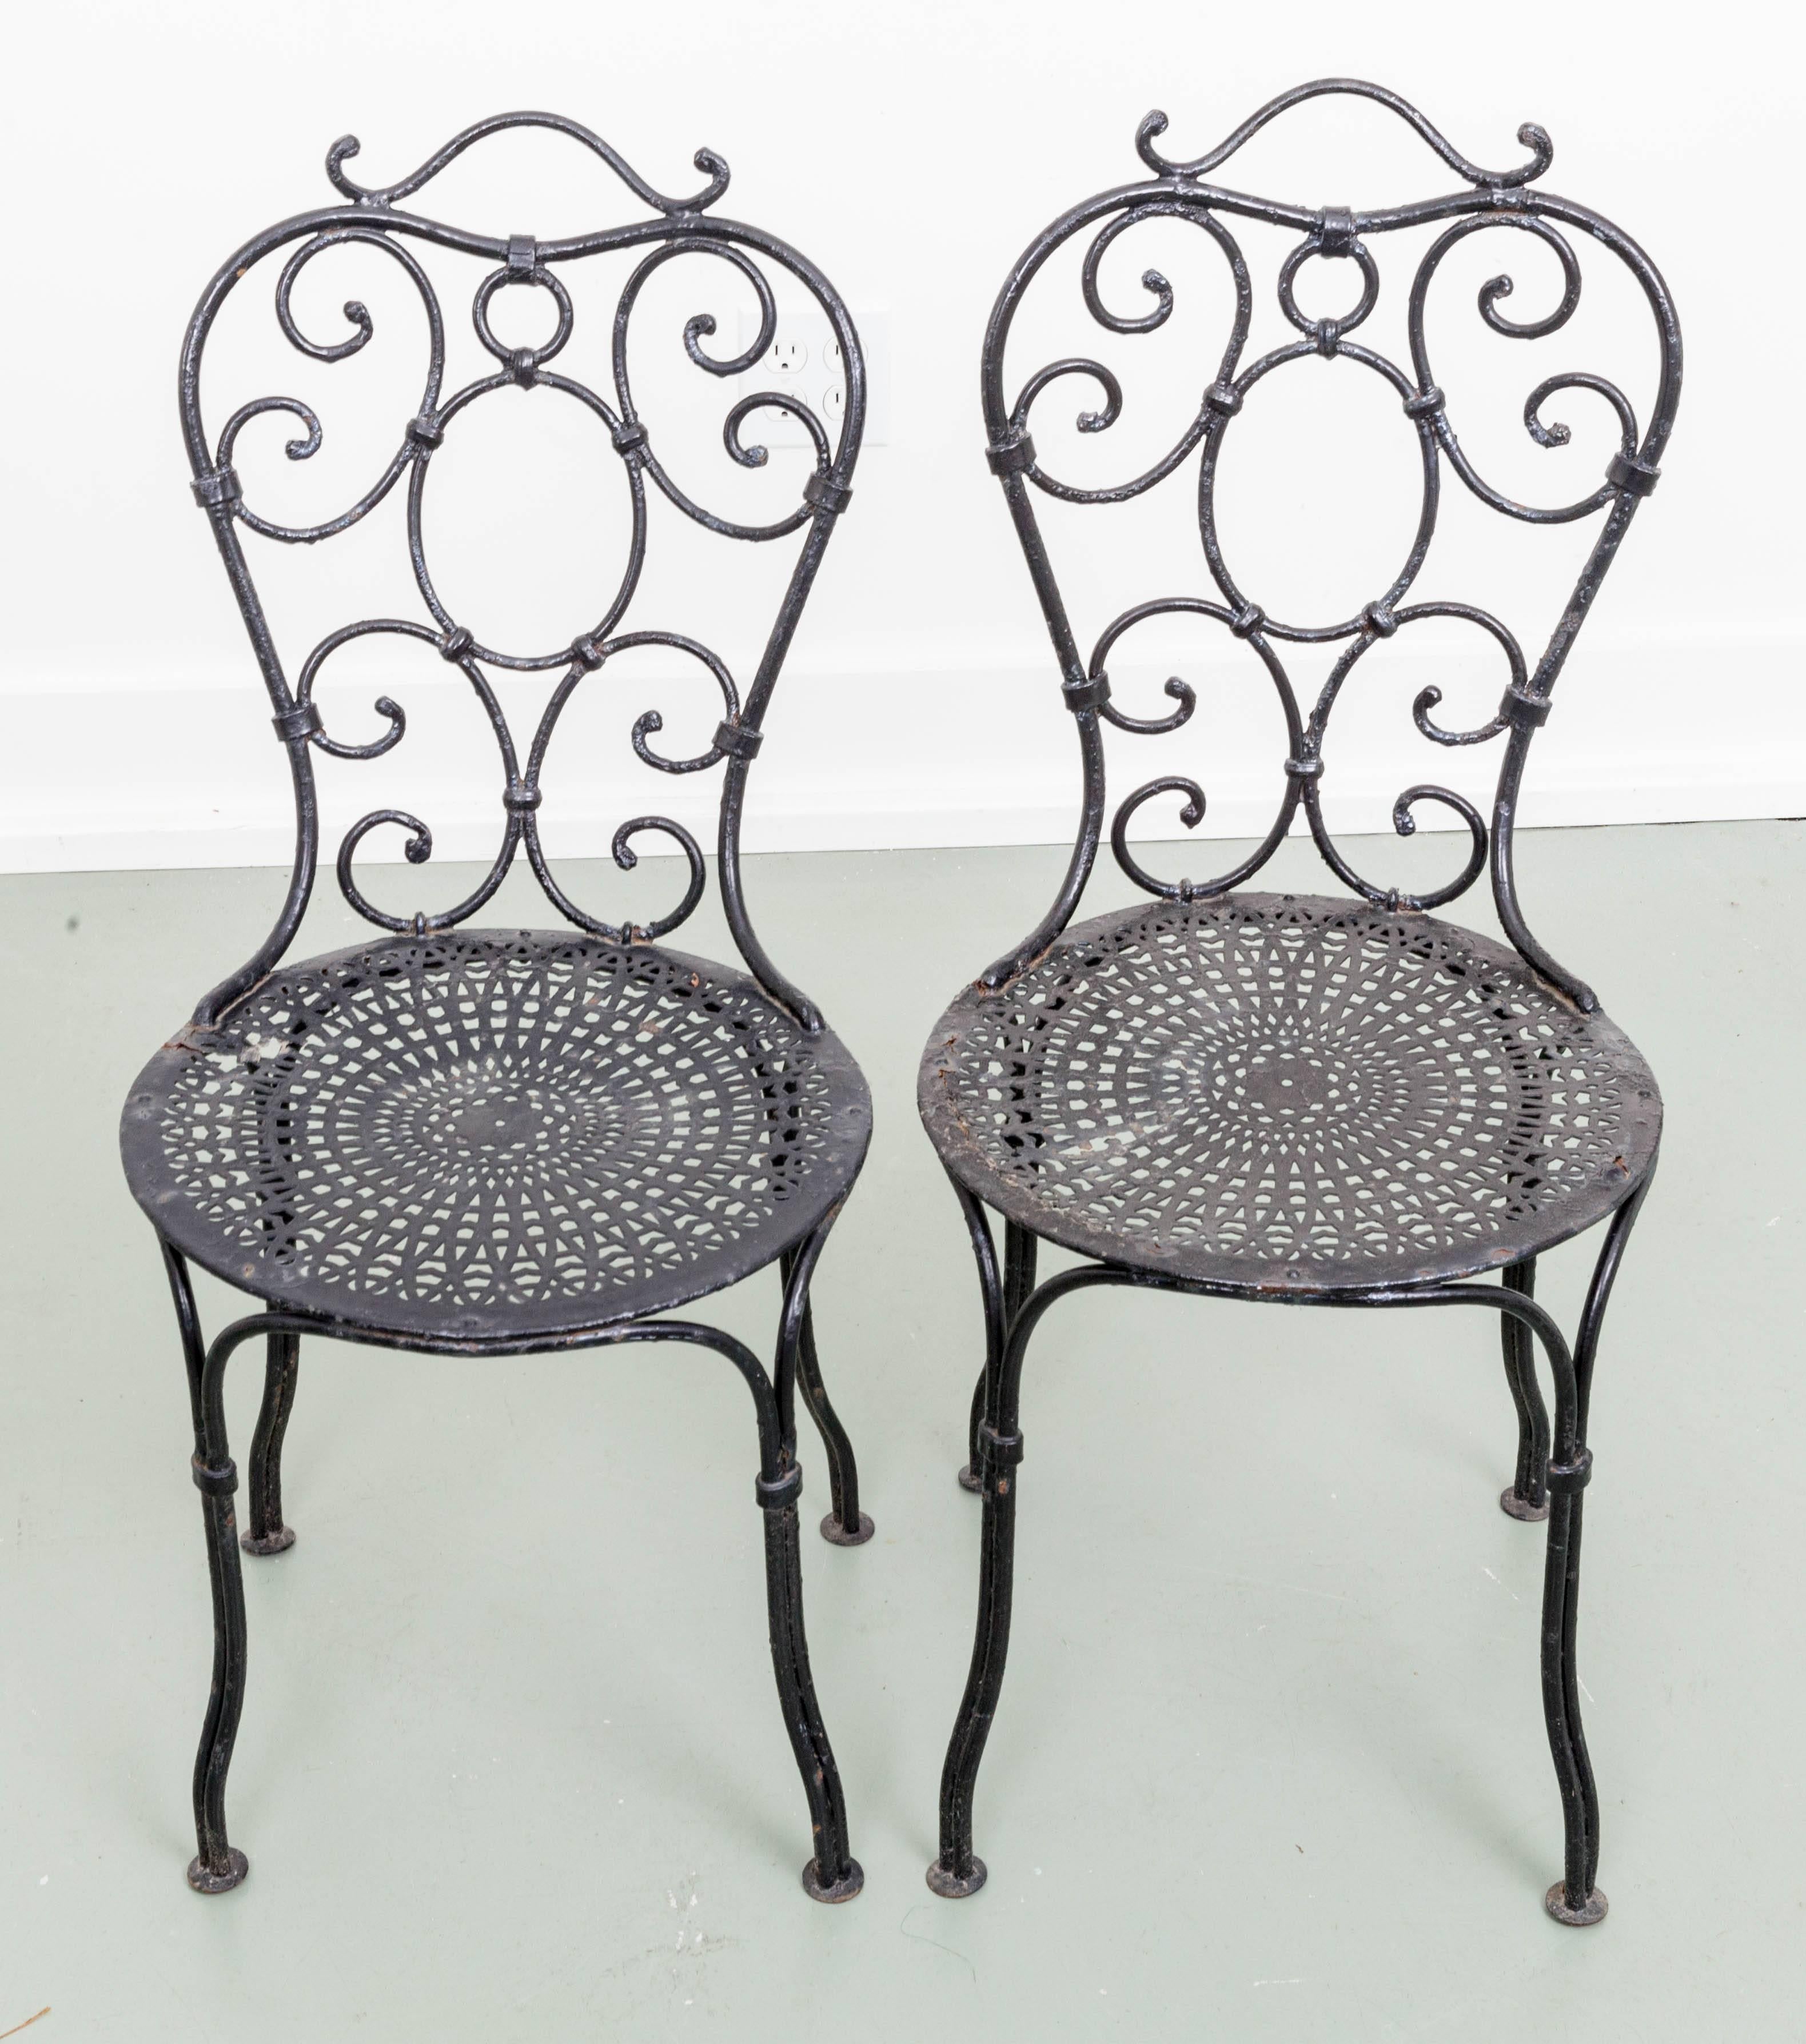 Early Pair of 19th Century French Wrought Iron Garden Chairs For Sale 1